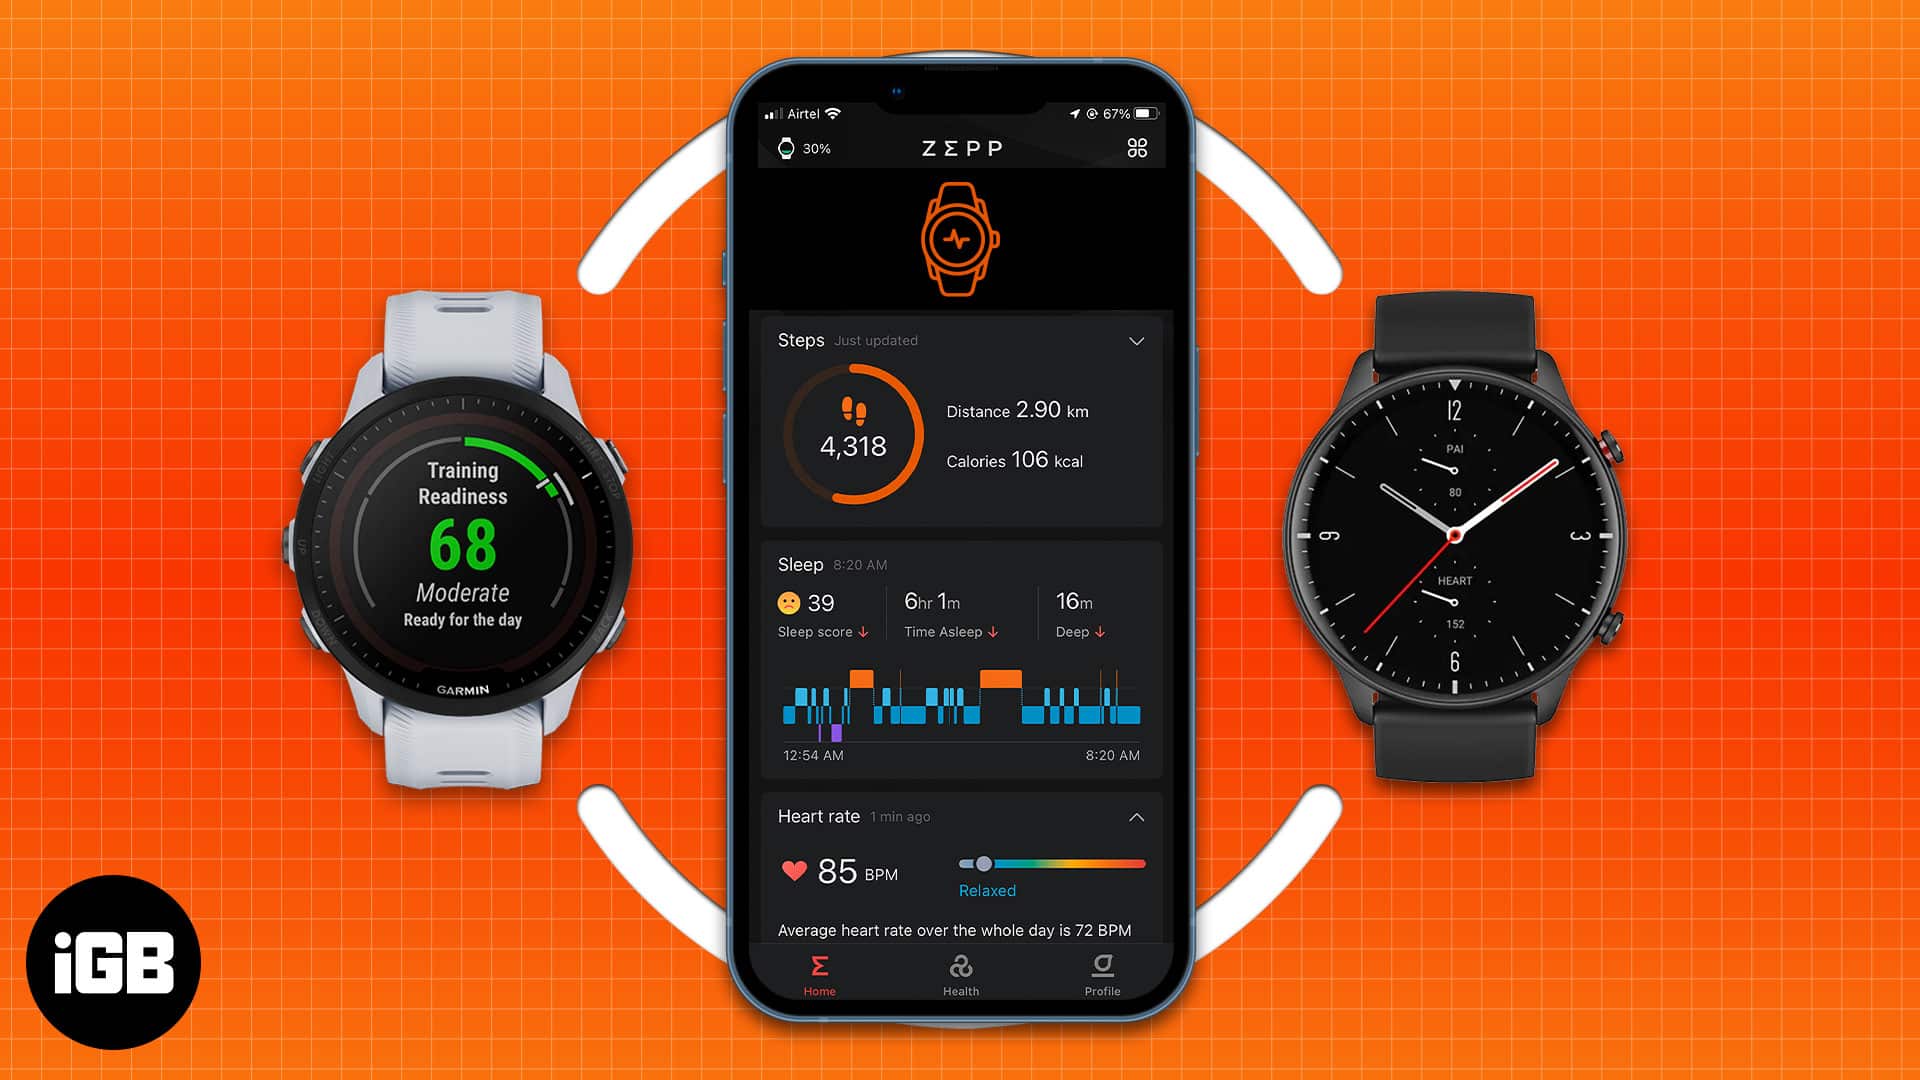 How to connect Android Wear watch to iPhone - iGeeksBlog